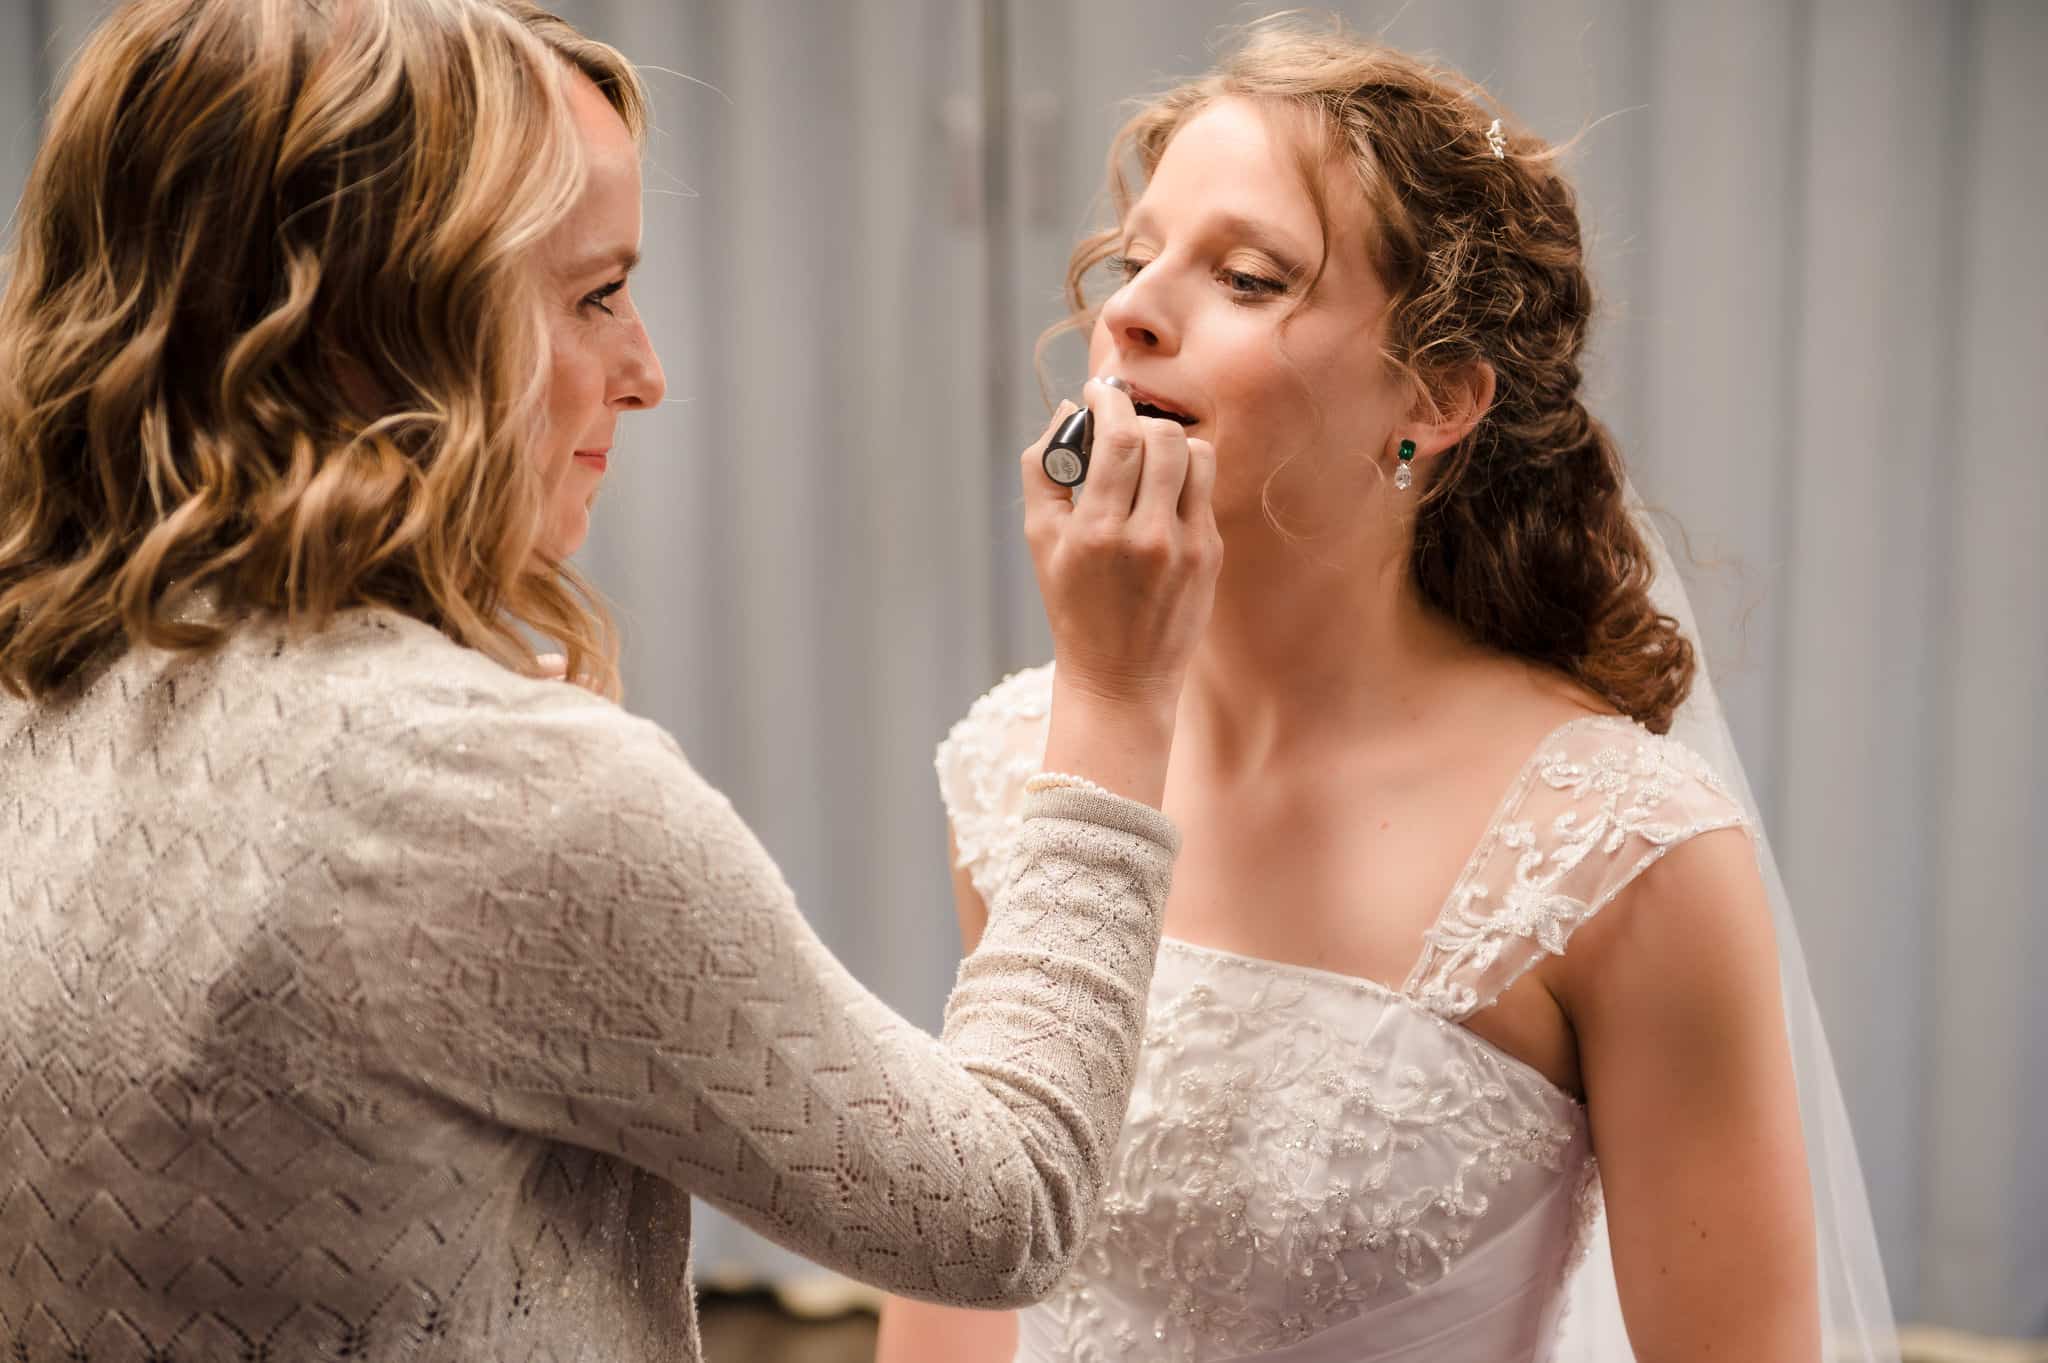 A friend applies lipstick to the bride helping her get ready before the ceremony.